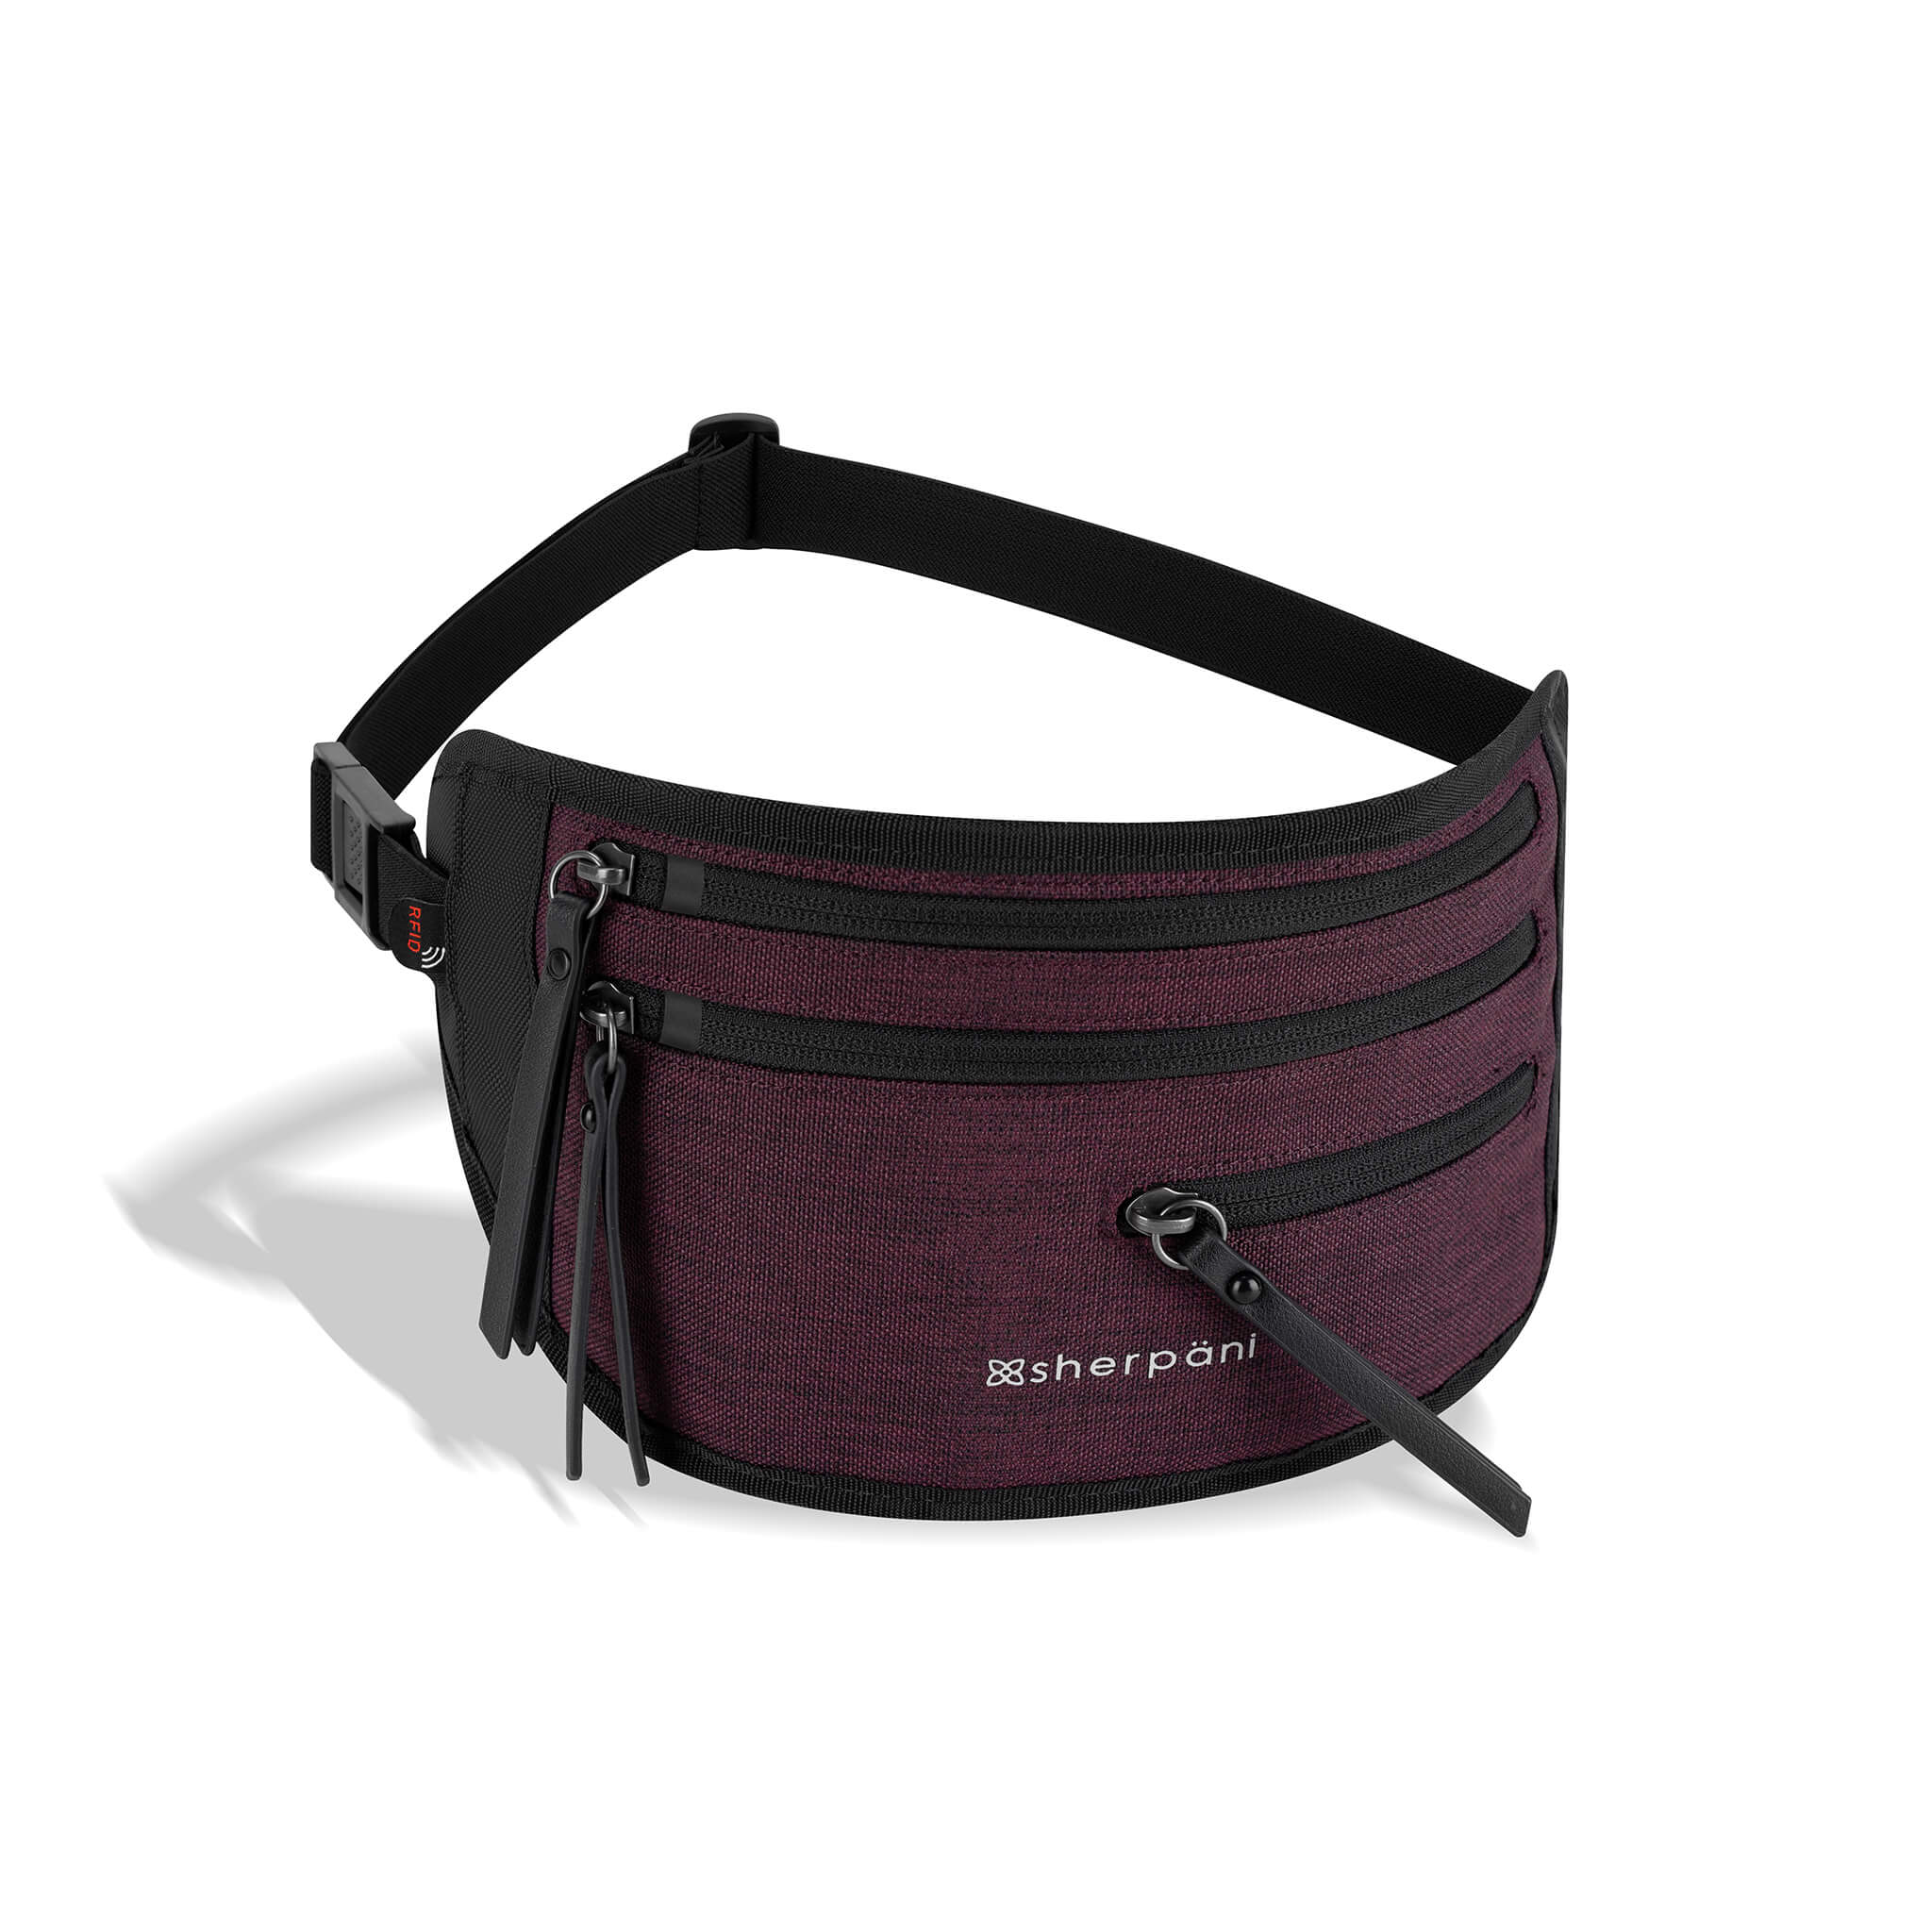 Angled front view of the Jett in Merlot. This convenient travel belt has lockable zippers and RFID protection, it makes the perfect hiding spot for your passport and other travel essentials. #color_merlot